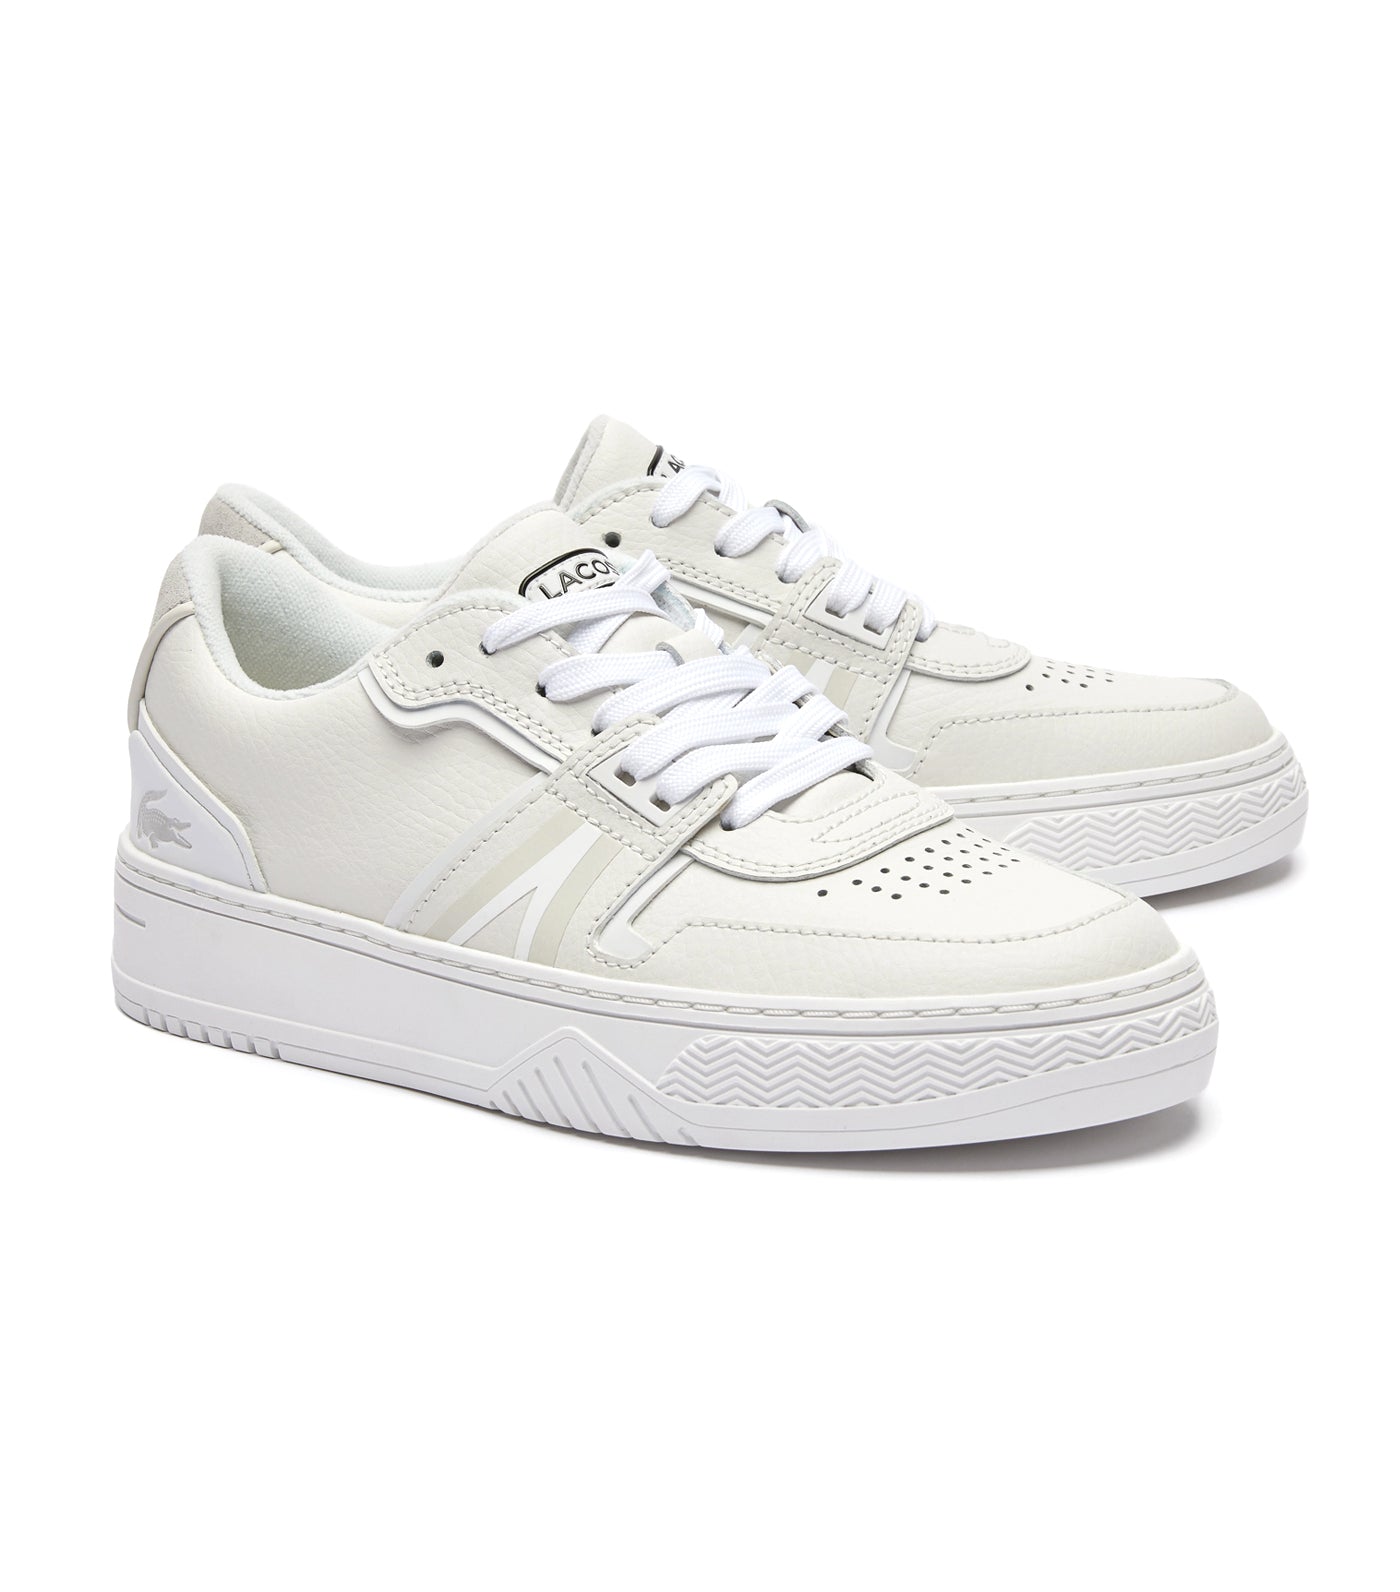 Women's L001 0321 1 Leather Sneakers White/Off White